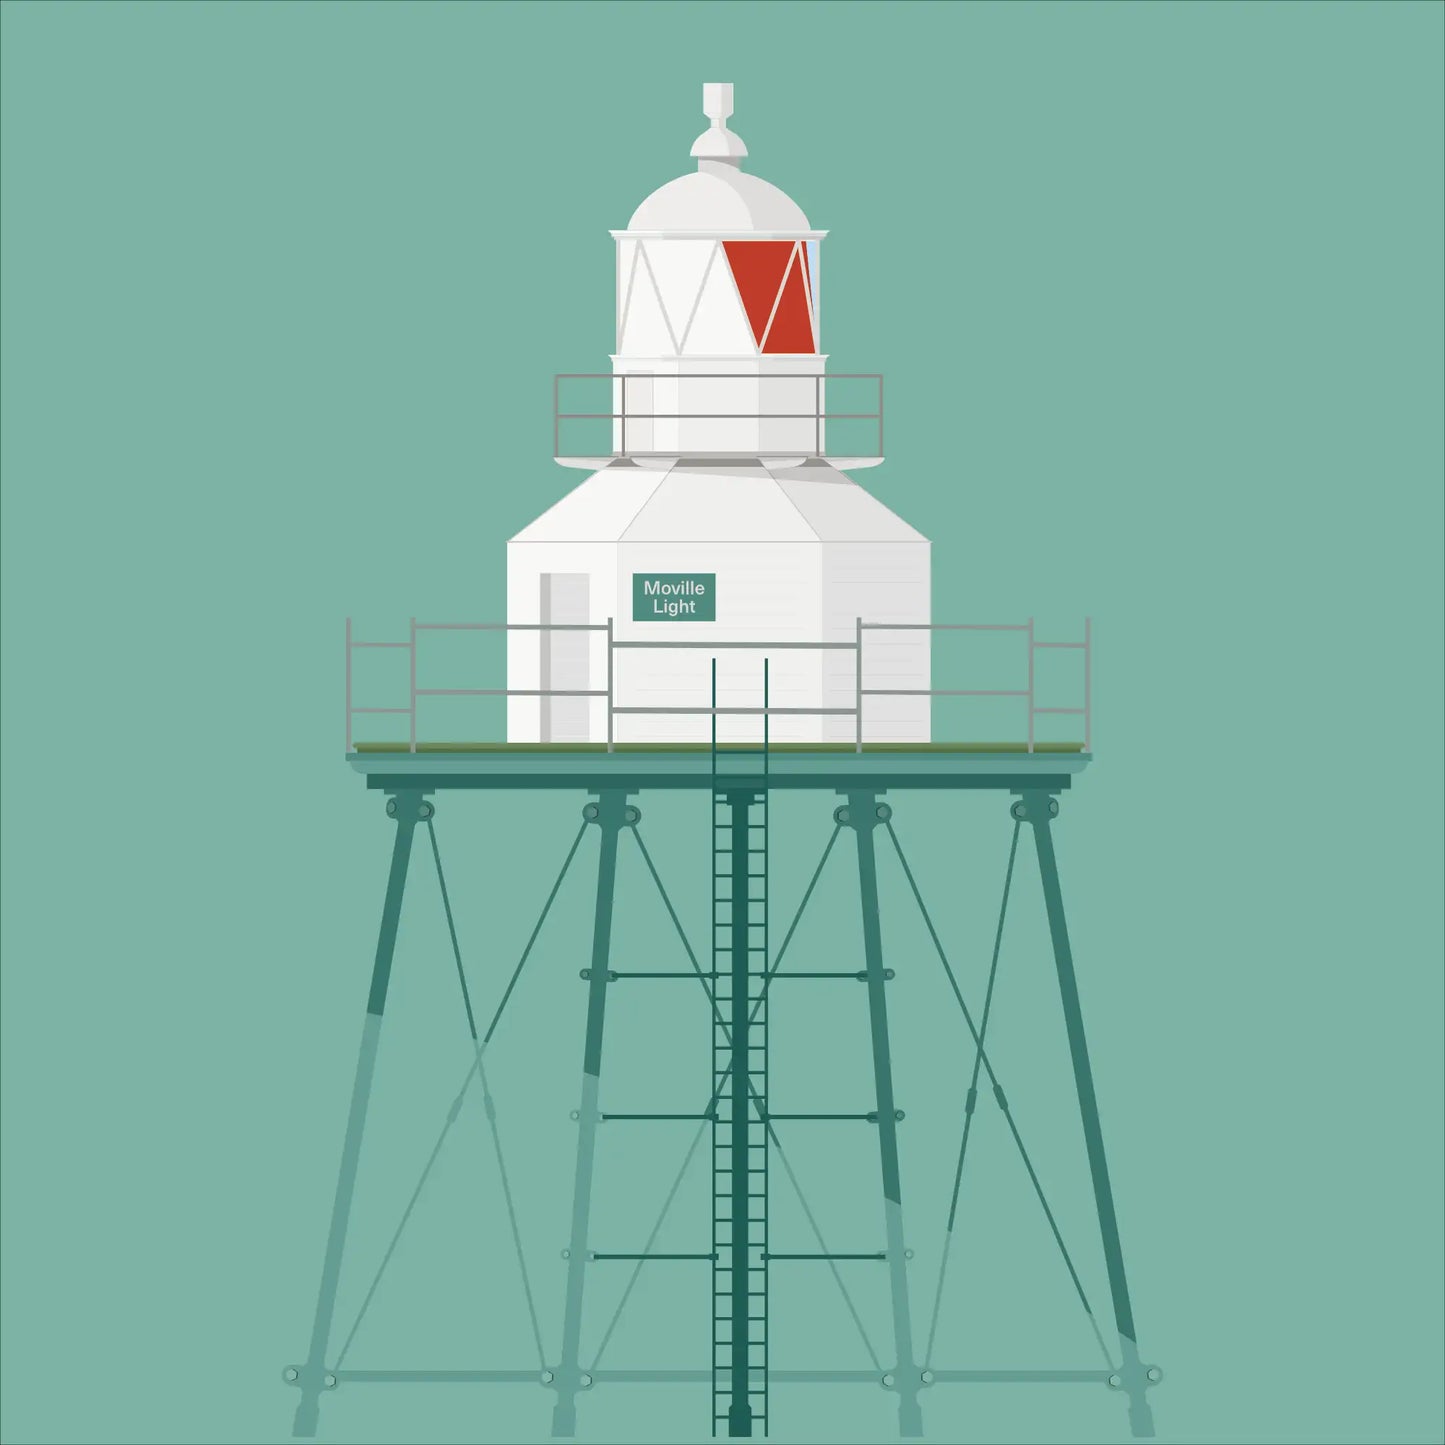 Contemporary graphic illustration of Moville lighthouse on a white background inside light blue square.